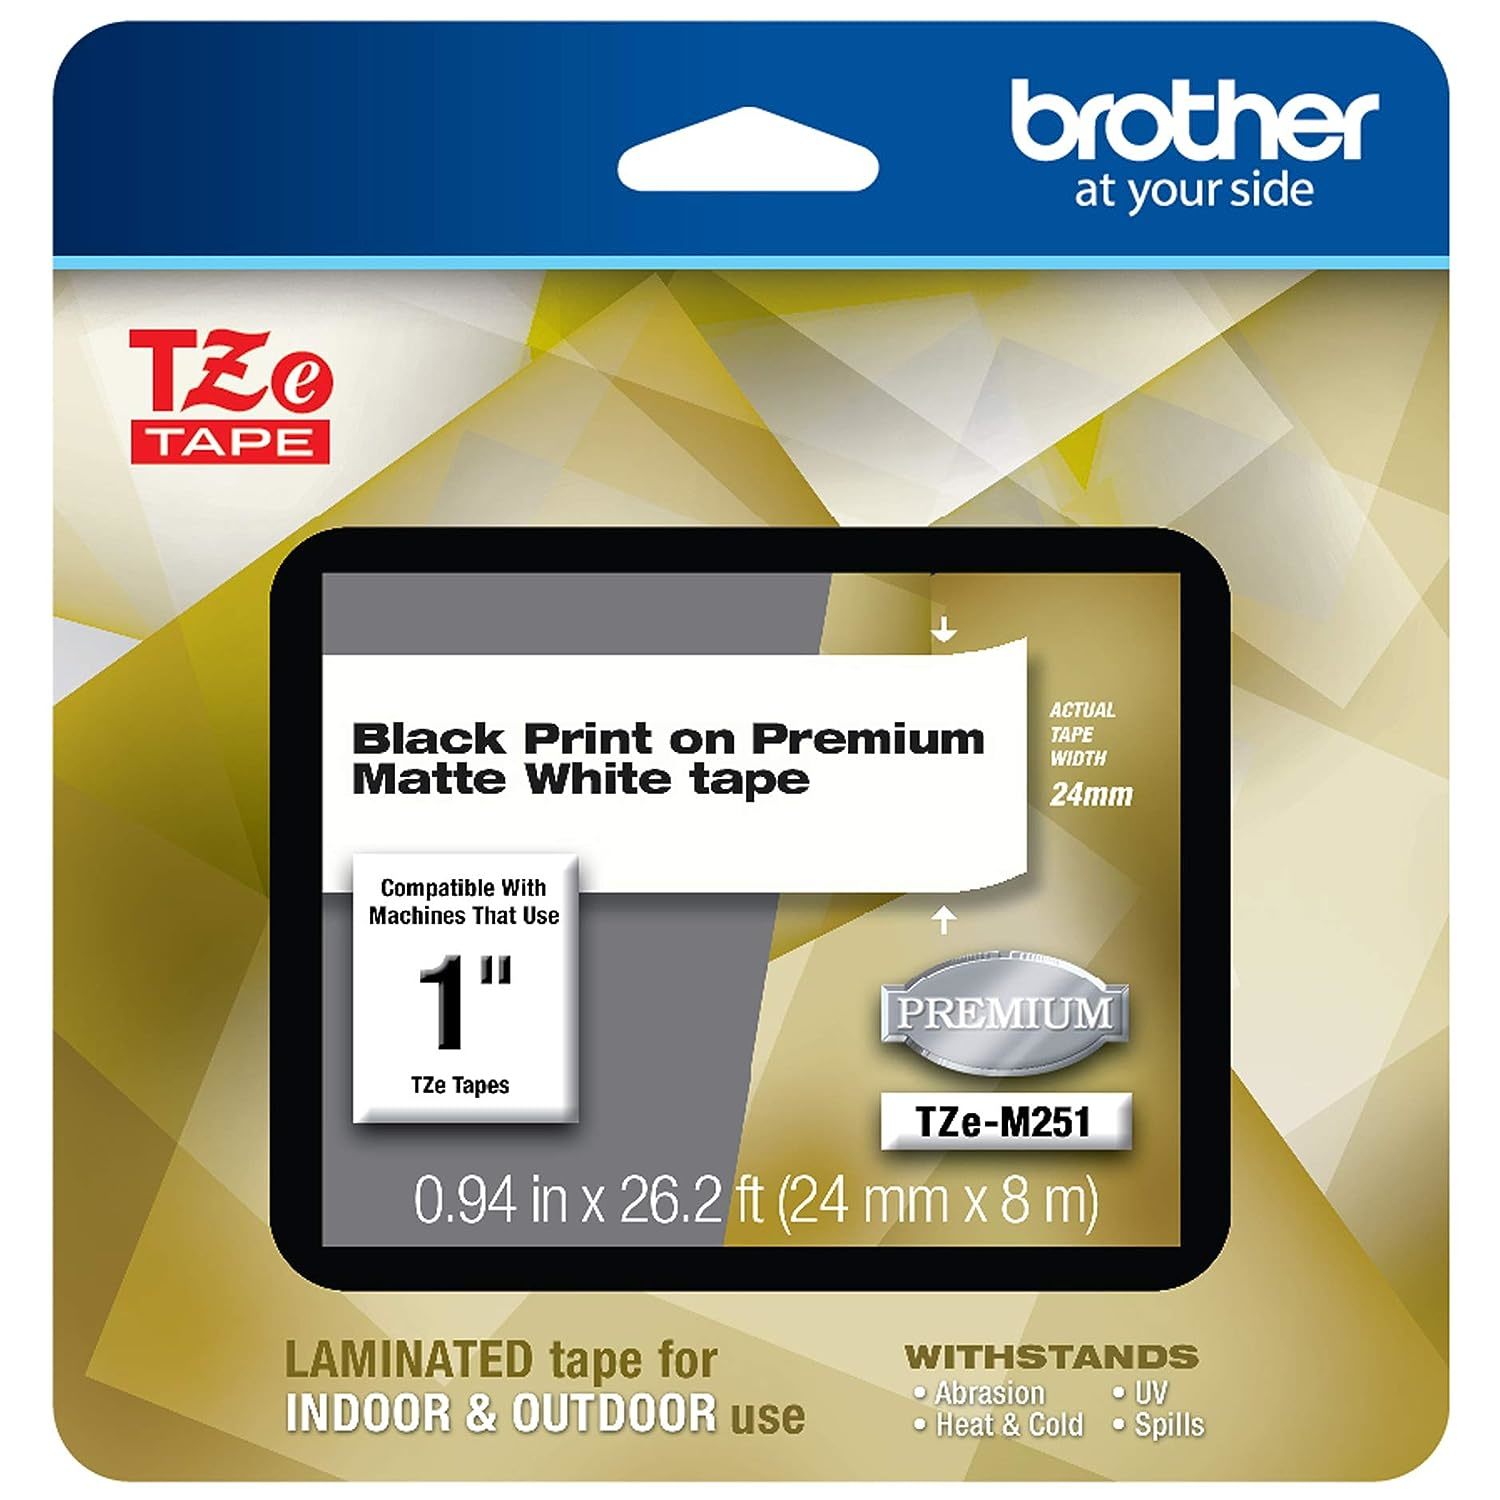 Primary image for Brother P-touch TZe-M251 Black Print on Premium Matte White Laminated Tape 24mm 